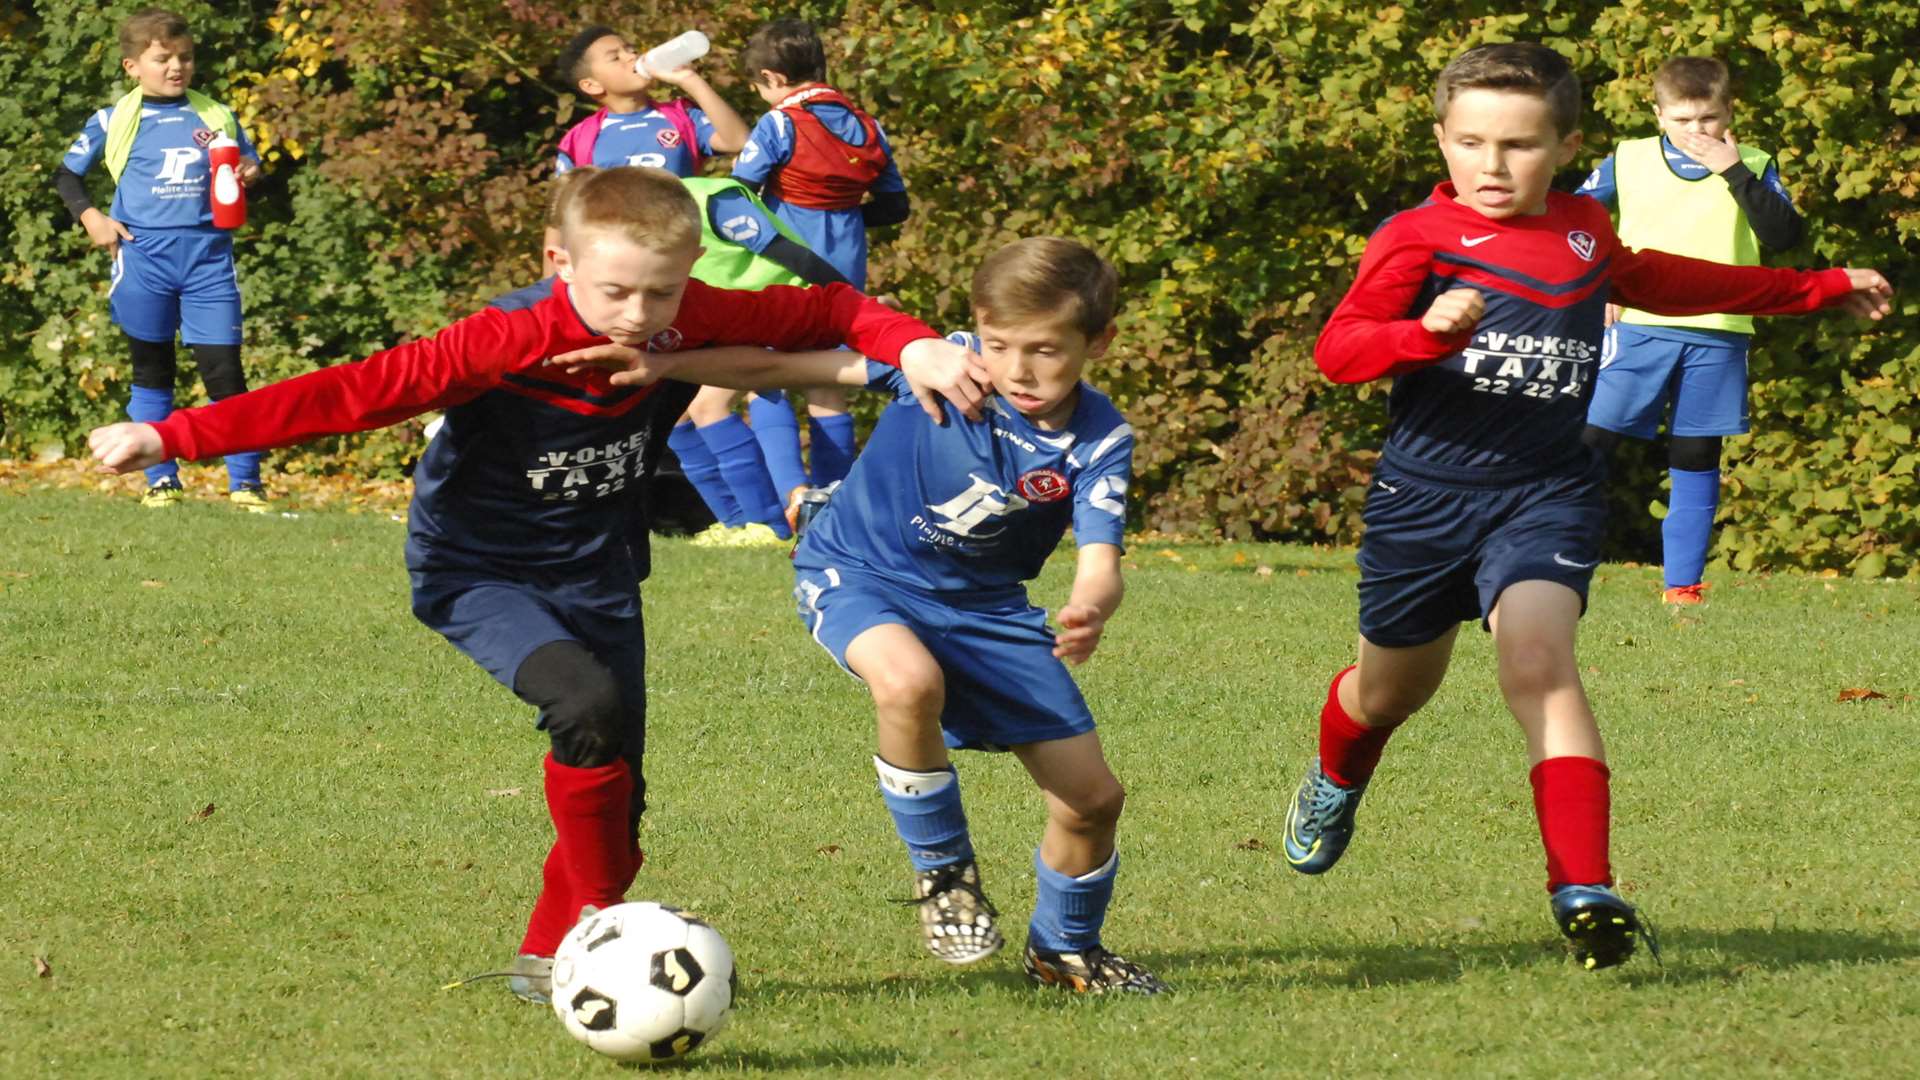 Hempstead Valley Colts under-10s (red) take on Hempstead Valley Picture: Chris Davey